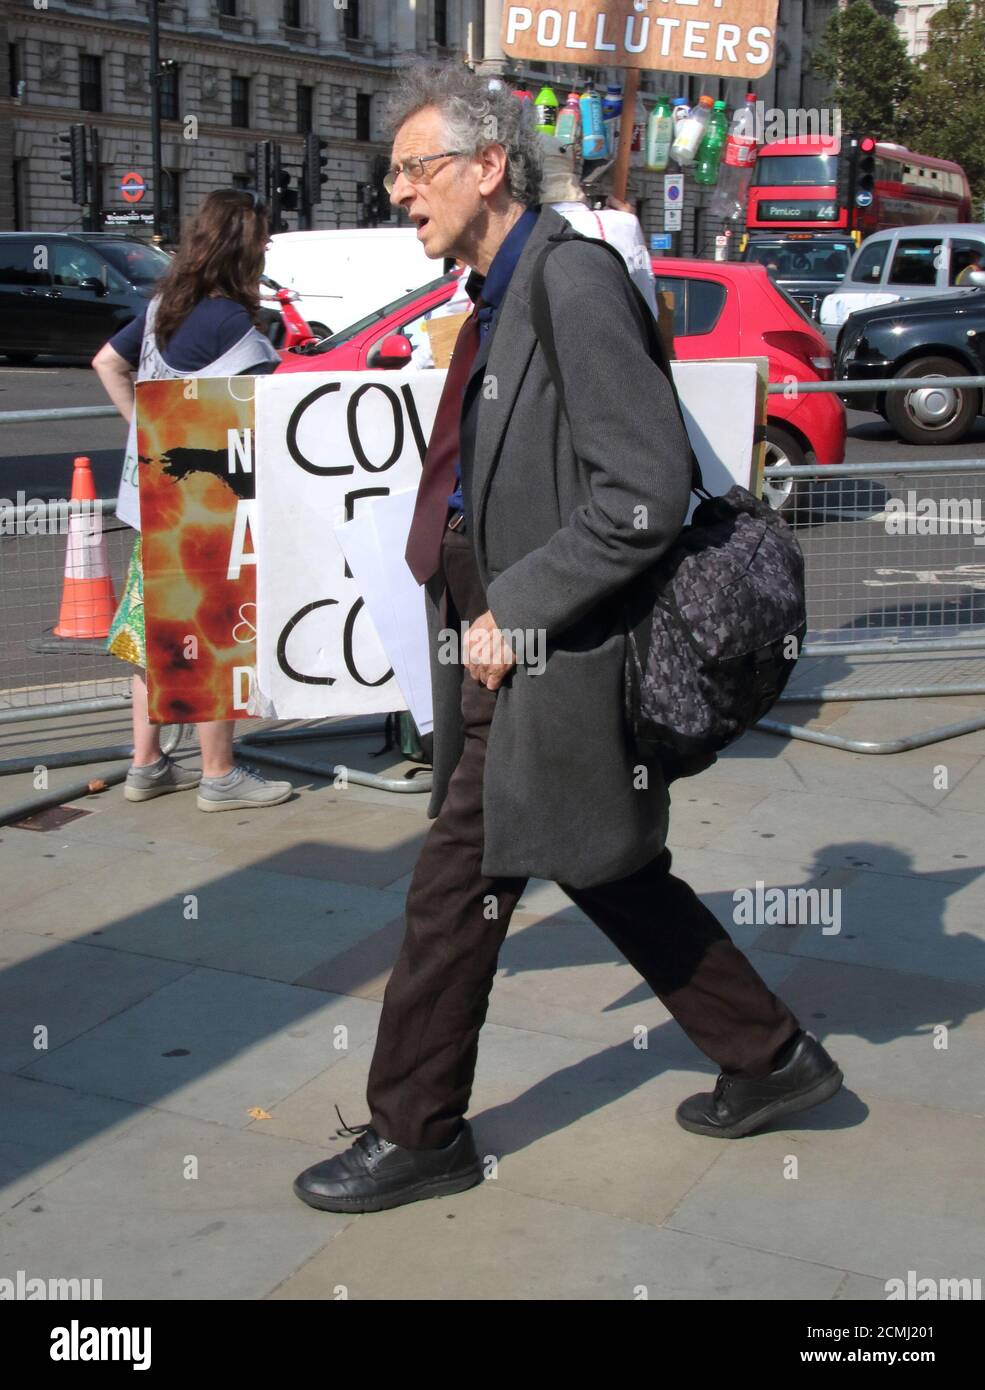 London, UK. 16th Sep, 2020. Piers Corbyn walks to Whitehall holding placards under his arm.Outspoken activist Piers Corbyn - brother of former labour Leader Jeremy Bernard Corbyn was seen campaigning opposite Downing Street, speaking to a crowd about his Covid-19 Conspiracy theory. He arrived in Westminster with several campaign placards after which he met with fellow activists in Whitehall. The astrophysicist has been addressing crowds throughout lockdown alleging Covid-19 outbreak was designed to control population. Credit: SOPA Images Limited/Alamy Live News Stock Photo